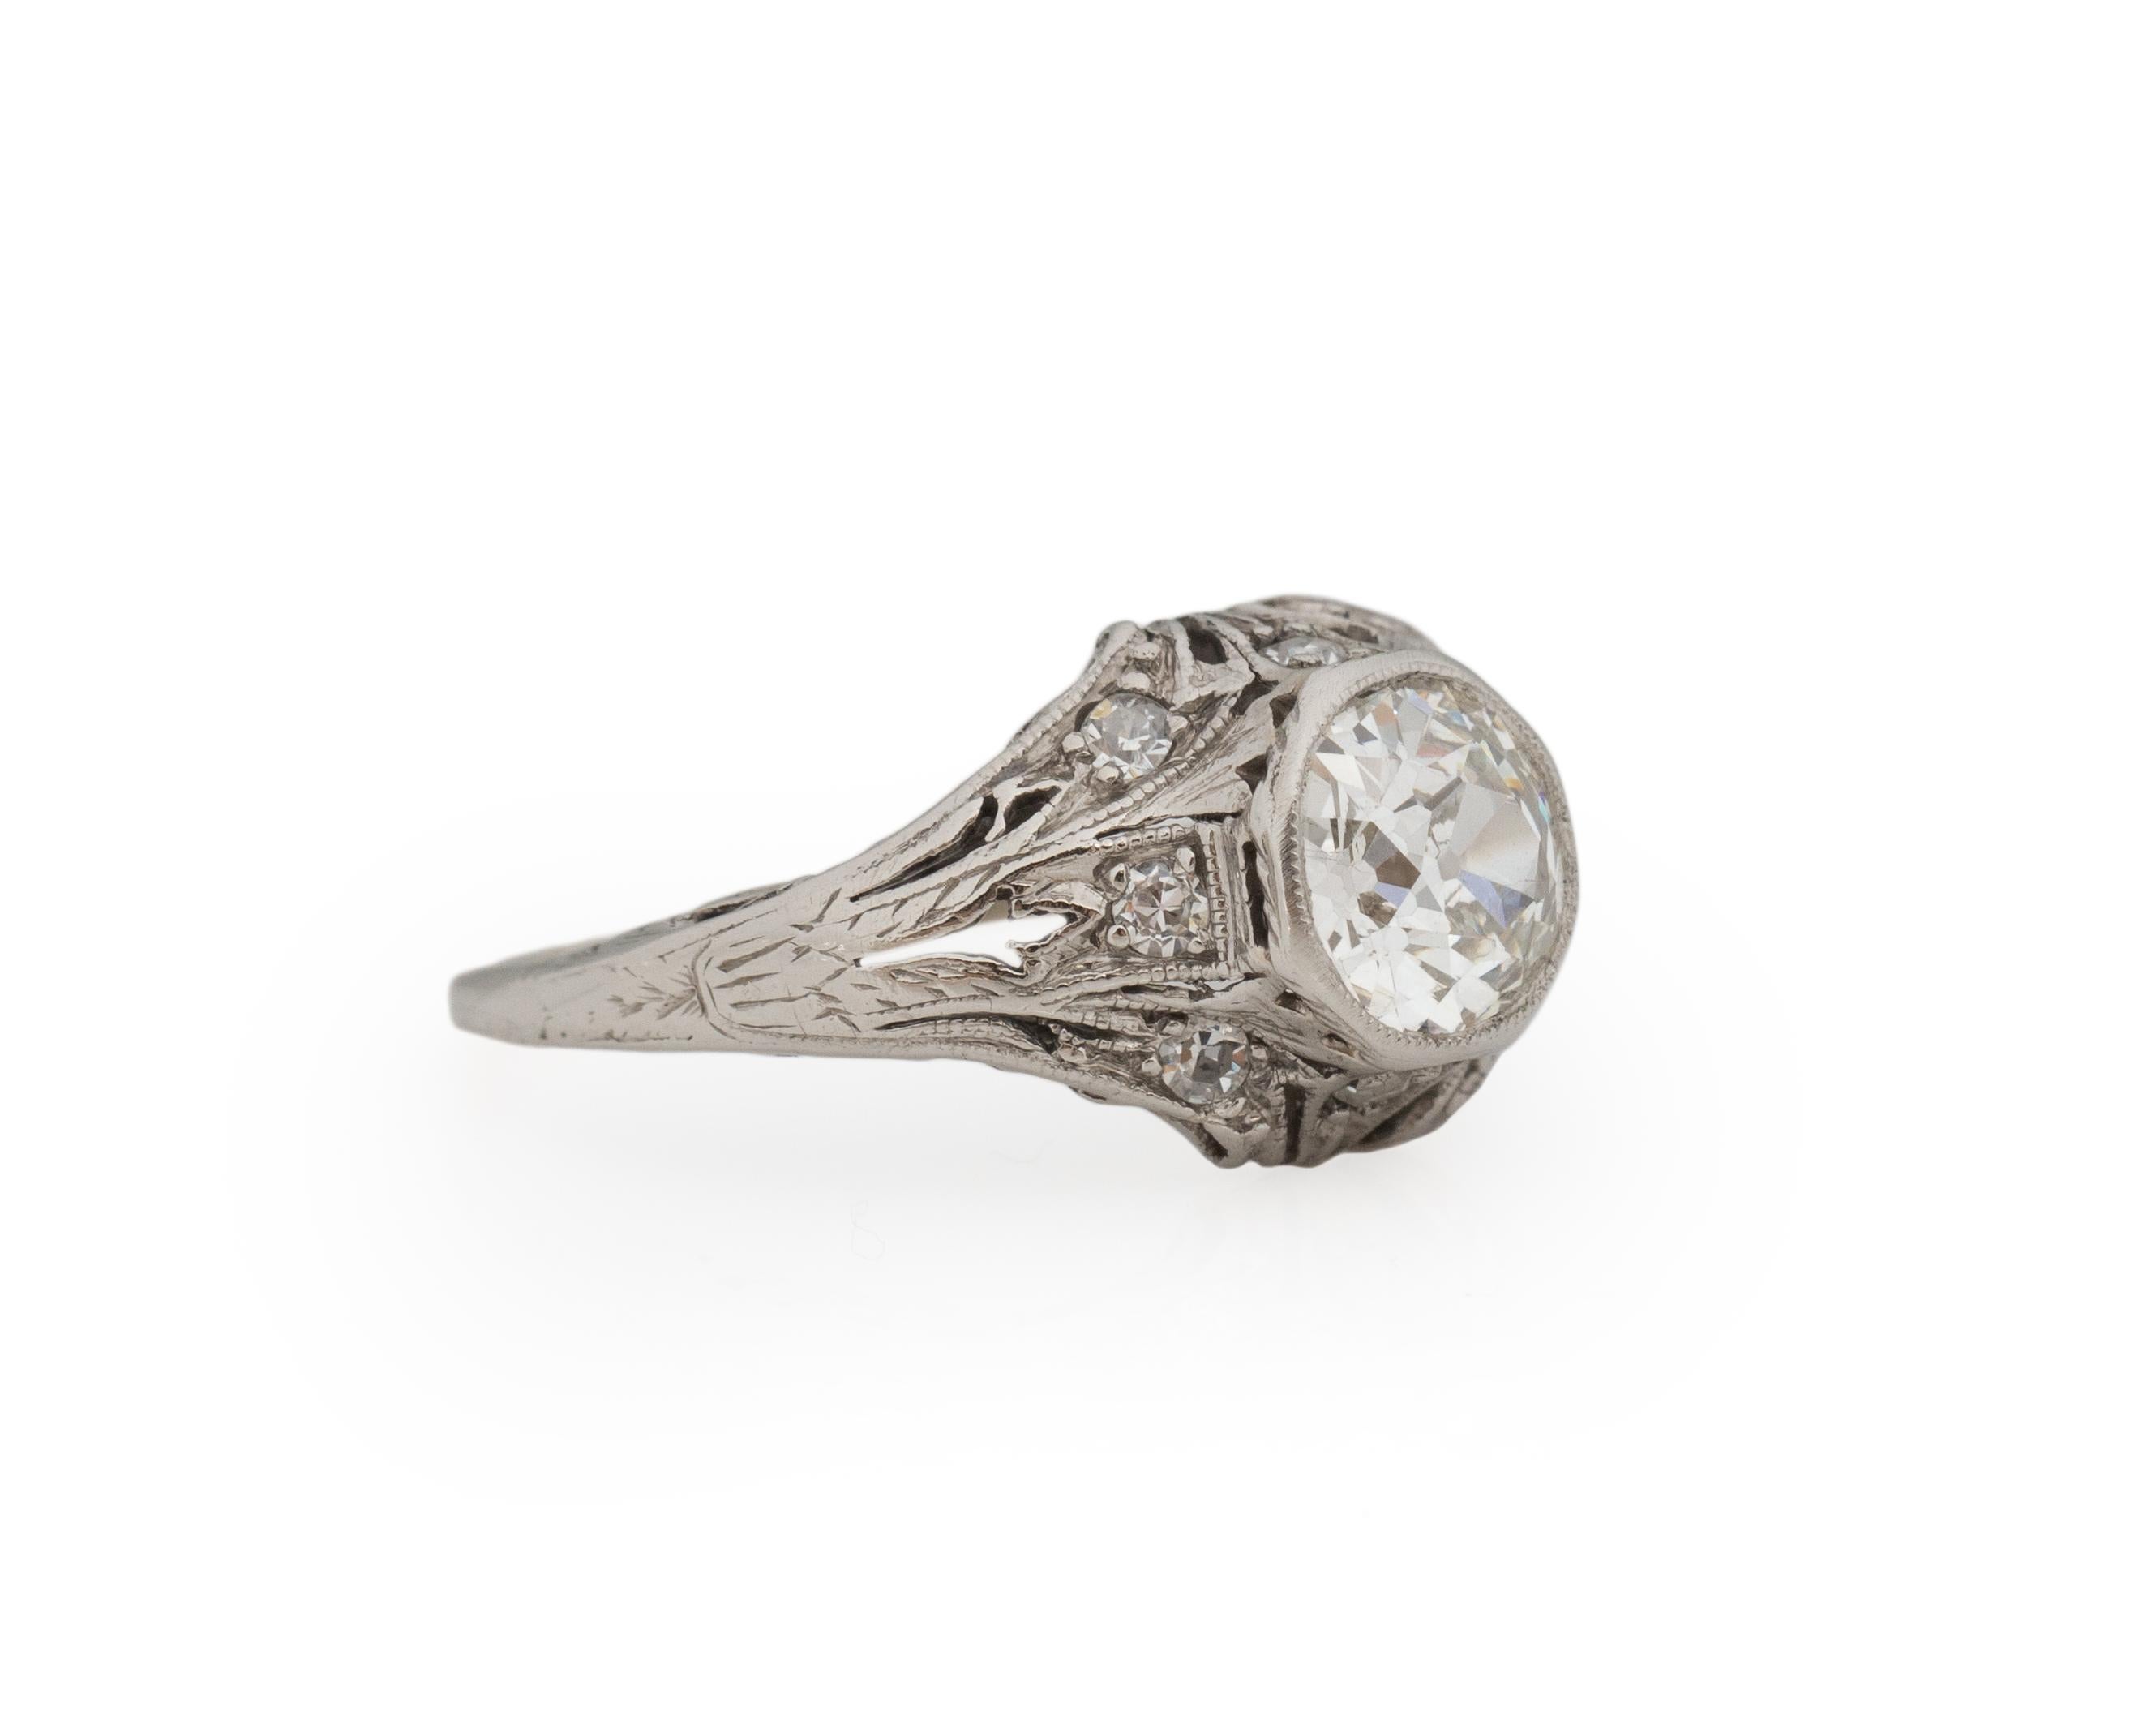 Ring Size: 5.25
Metal Type: Platinum [Hallmarked, and Tested]
Weight: 3.1 grams

Center Diamond Details:
GIA REPORT #:2223129197
Weight: .97ct
Cut: Old Mine brilliant (Antique Cushion)
Color: I
Clarity: SI1
Measurements:6.70 mm x 6.23mm x